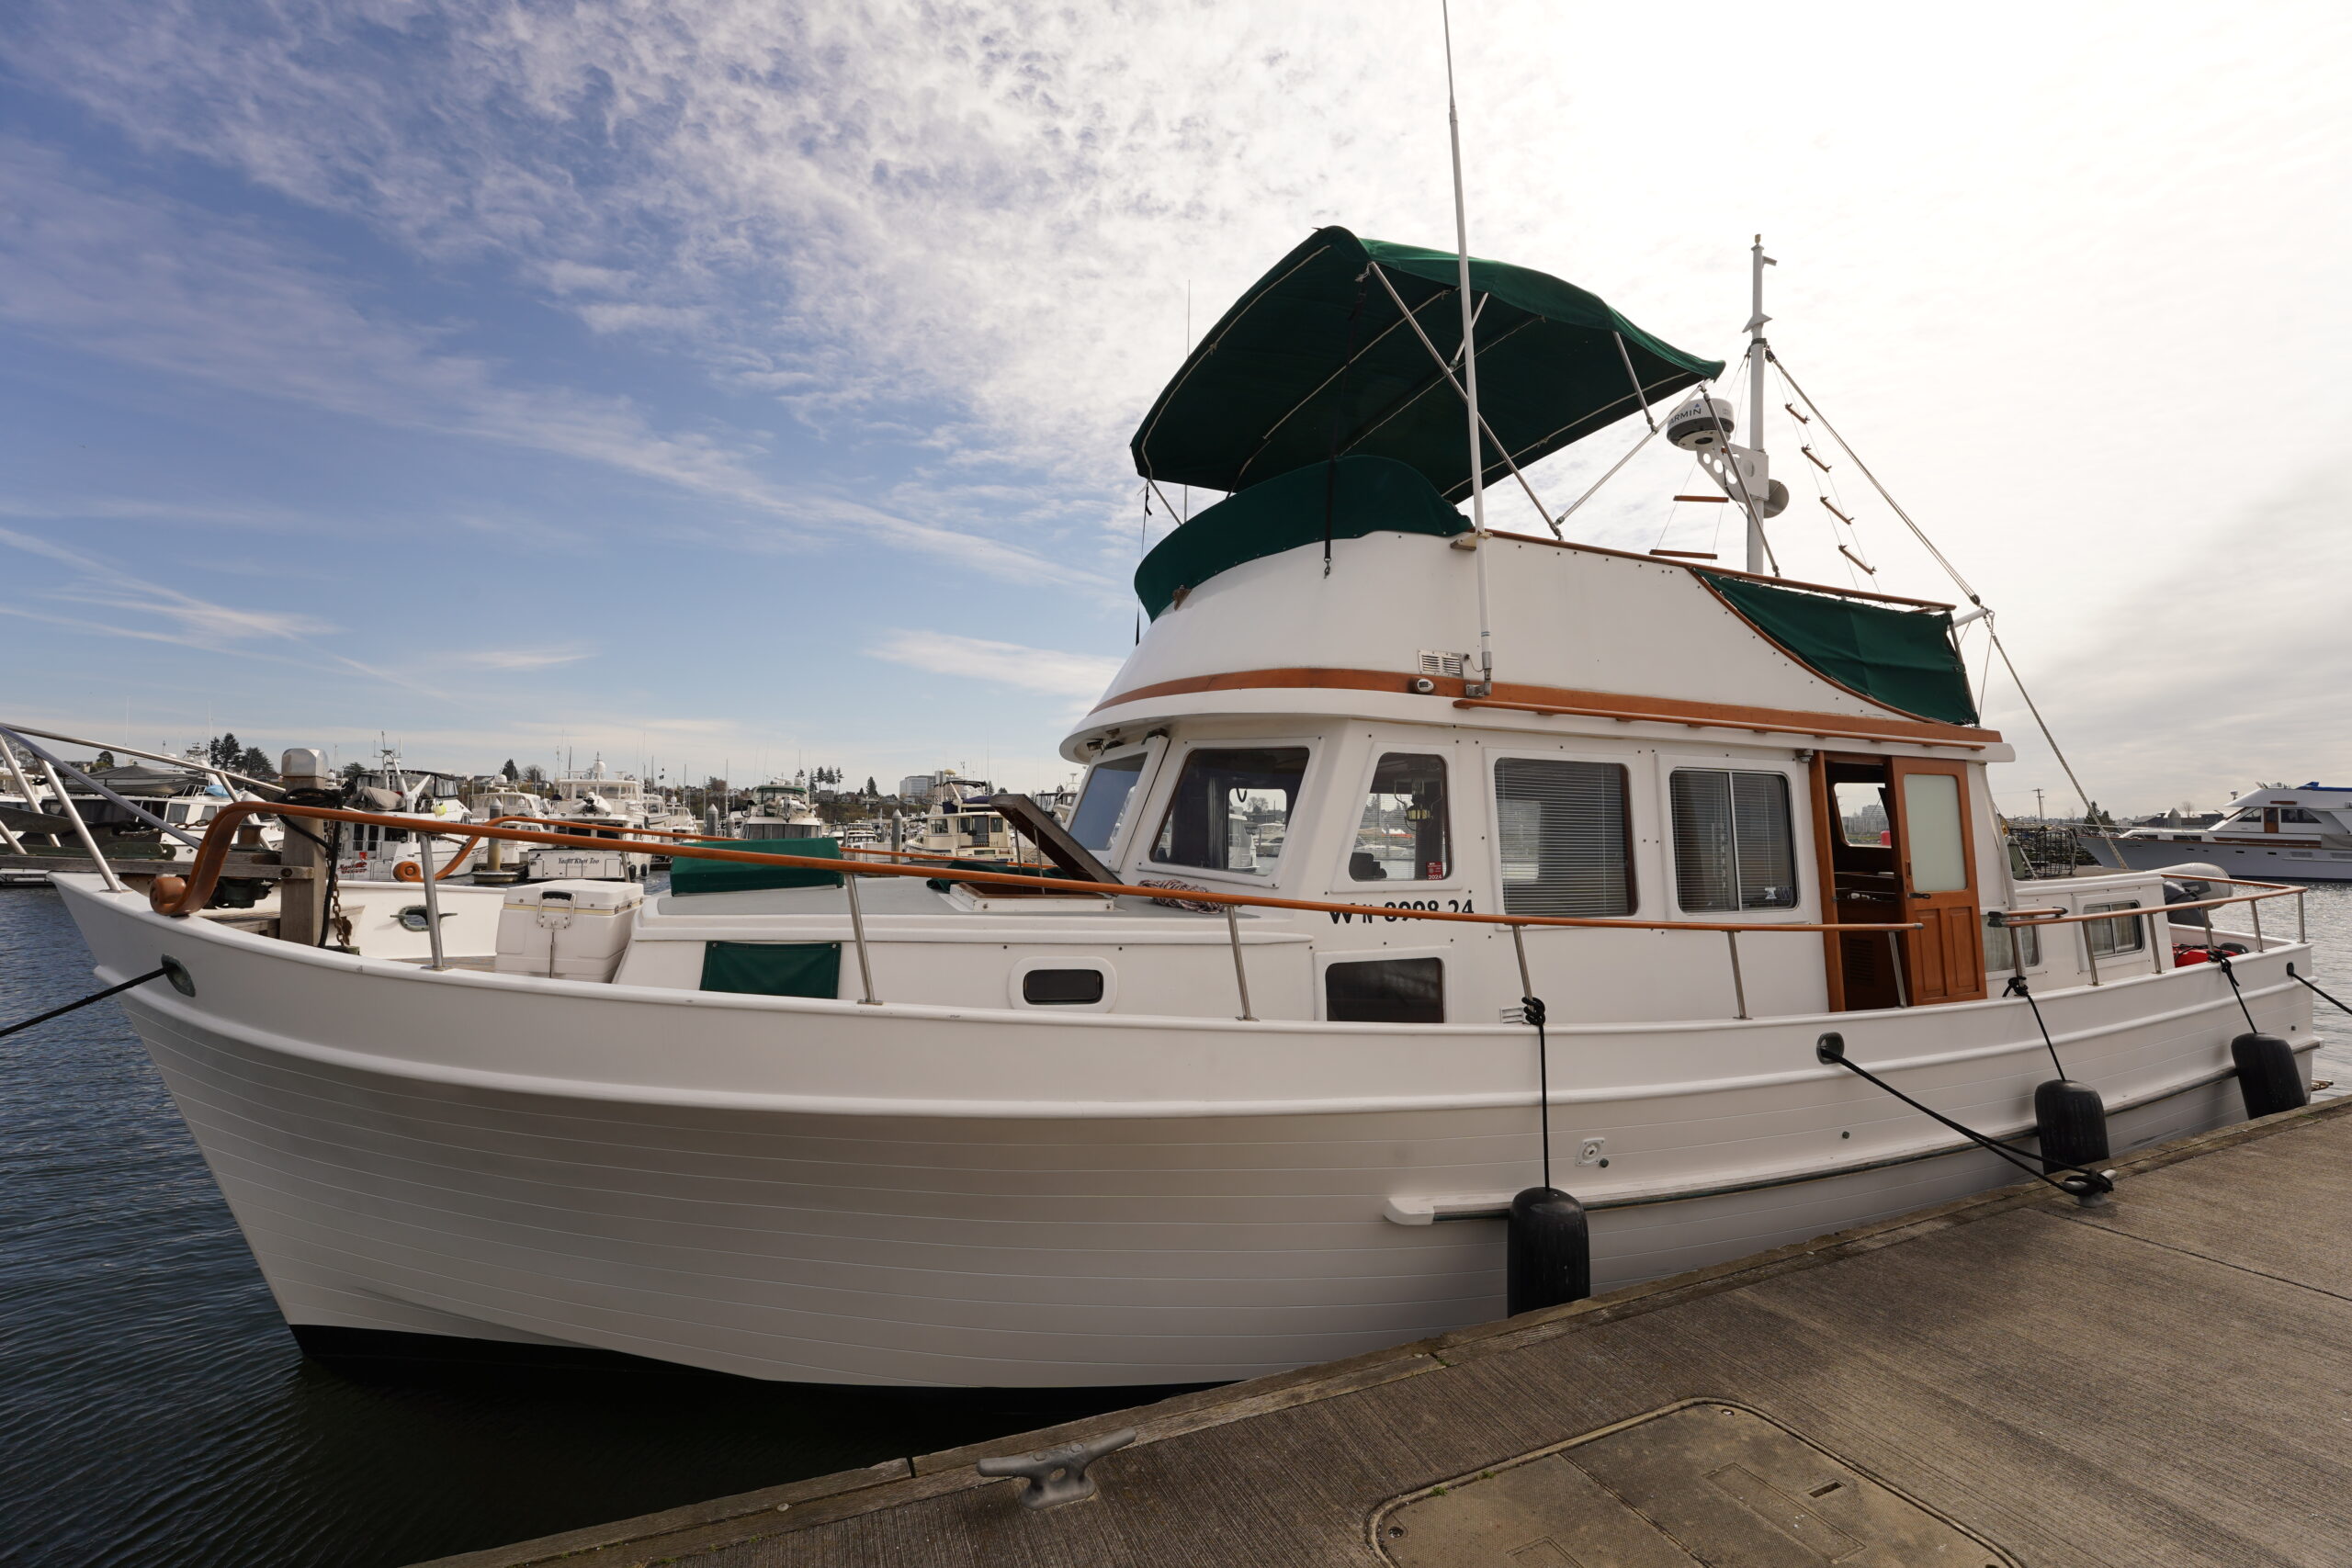 The History of the Marine Trader 44 Trawler